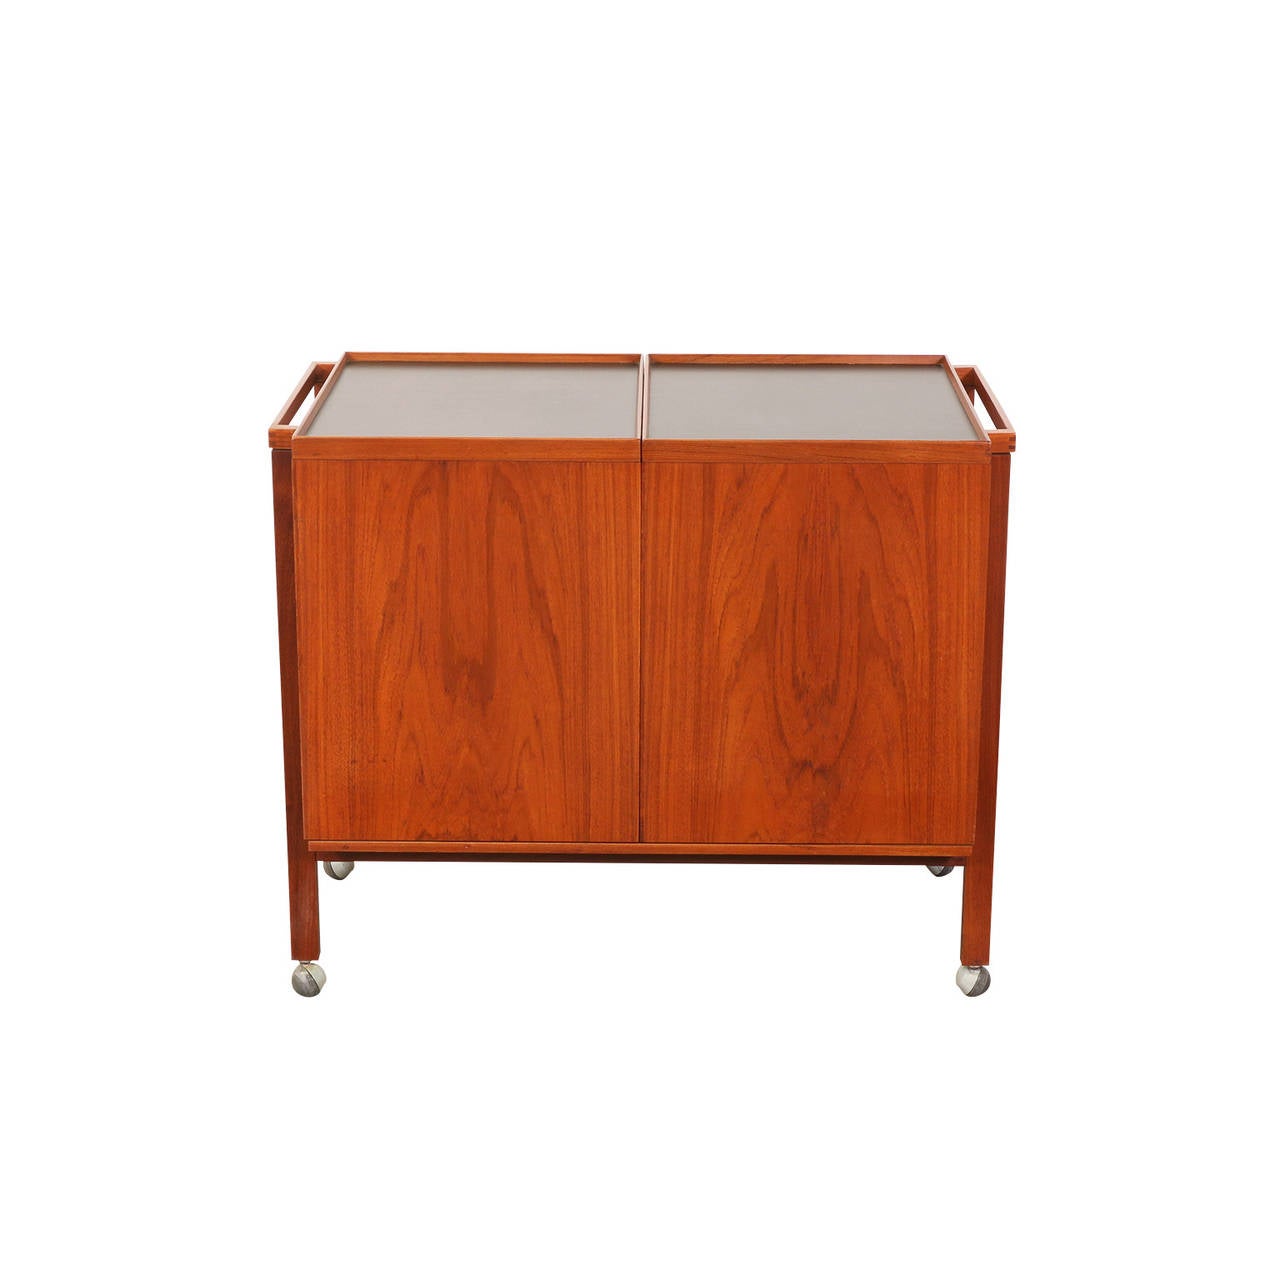 Unique rolling bar cart featuring two sections that slide out to reveal an interior with a glass shelf and enamel color sliding dividers. It’s durable laminate top makes a great surface for mixing and serving drinks too!